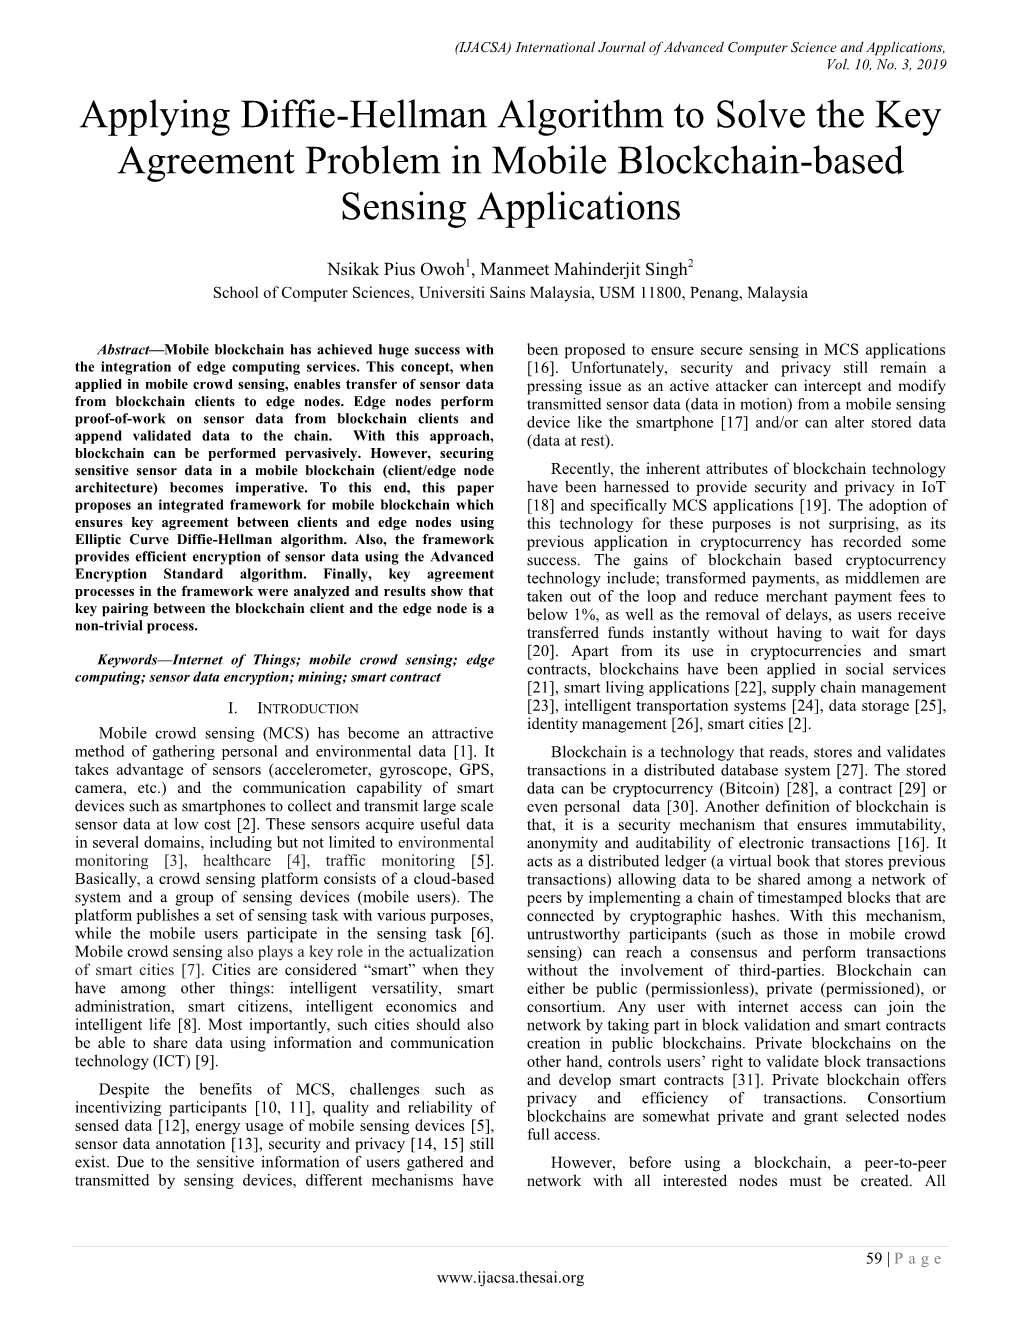 Applying Diffie-Hellman Algorithm to Solve the Key Agreement Problem in Mobile Blockchain-Based Sensing Applications